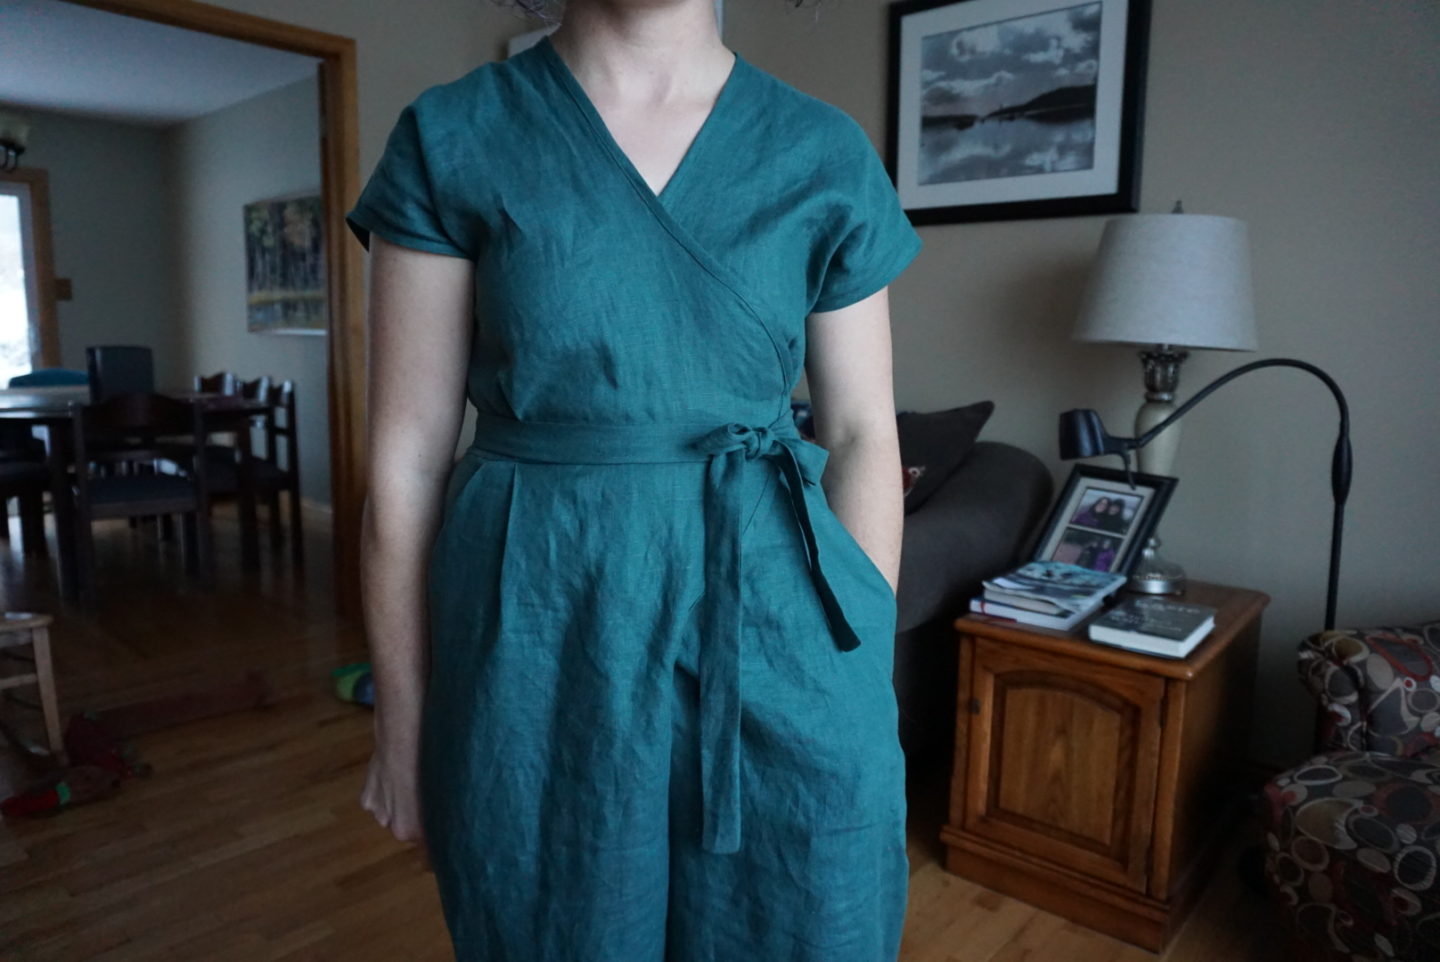 Megan is wearing a forest green wrap jumpsuit, standing in front of a couch in a living room.